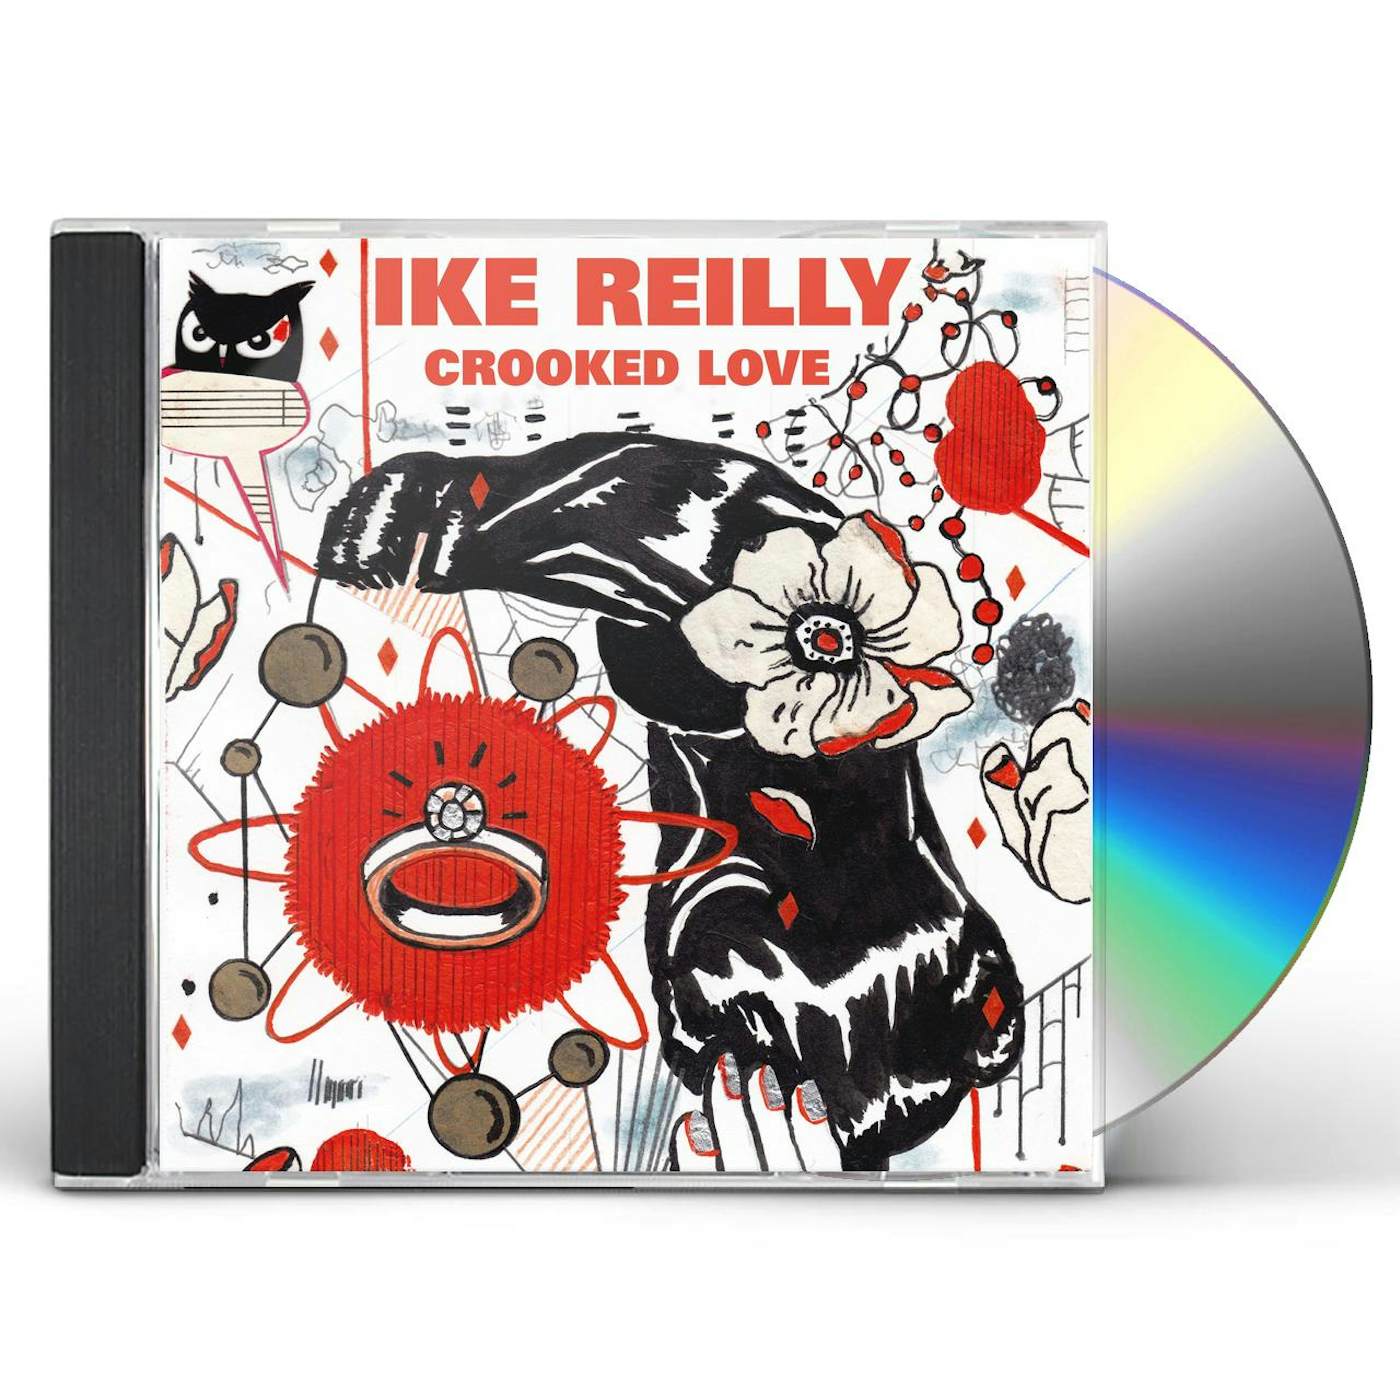 Ike Reilly CROOKED LOVE CD